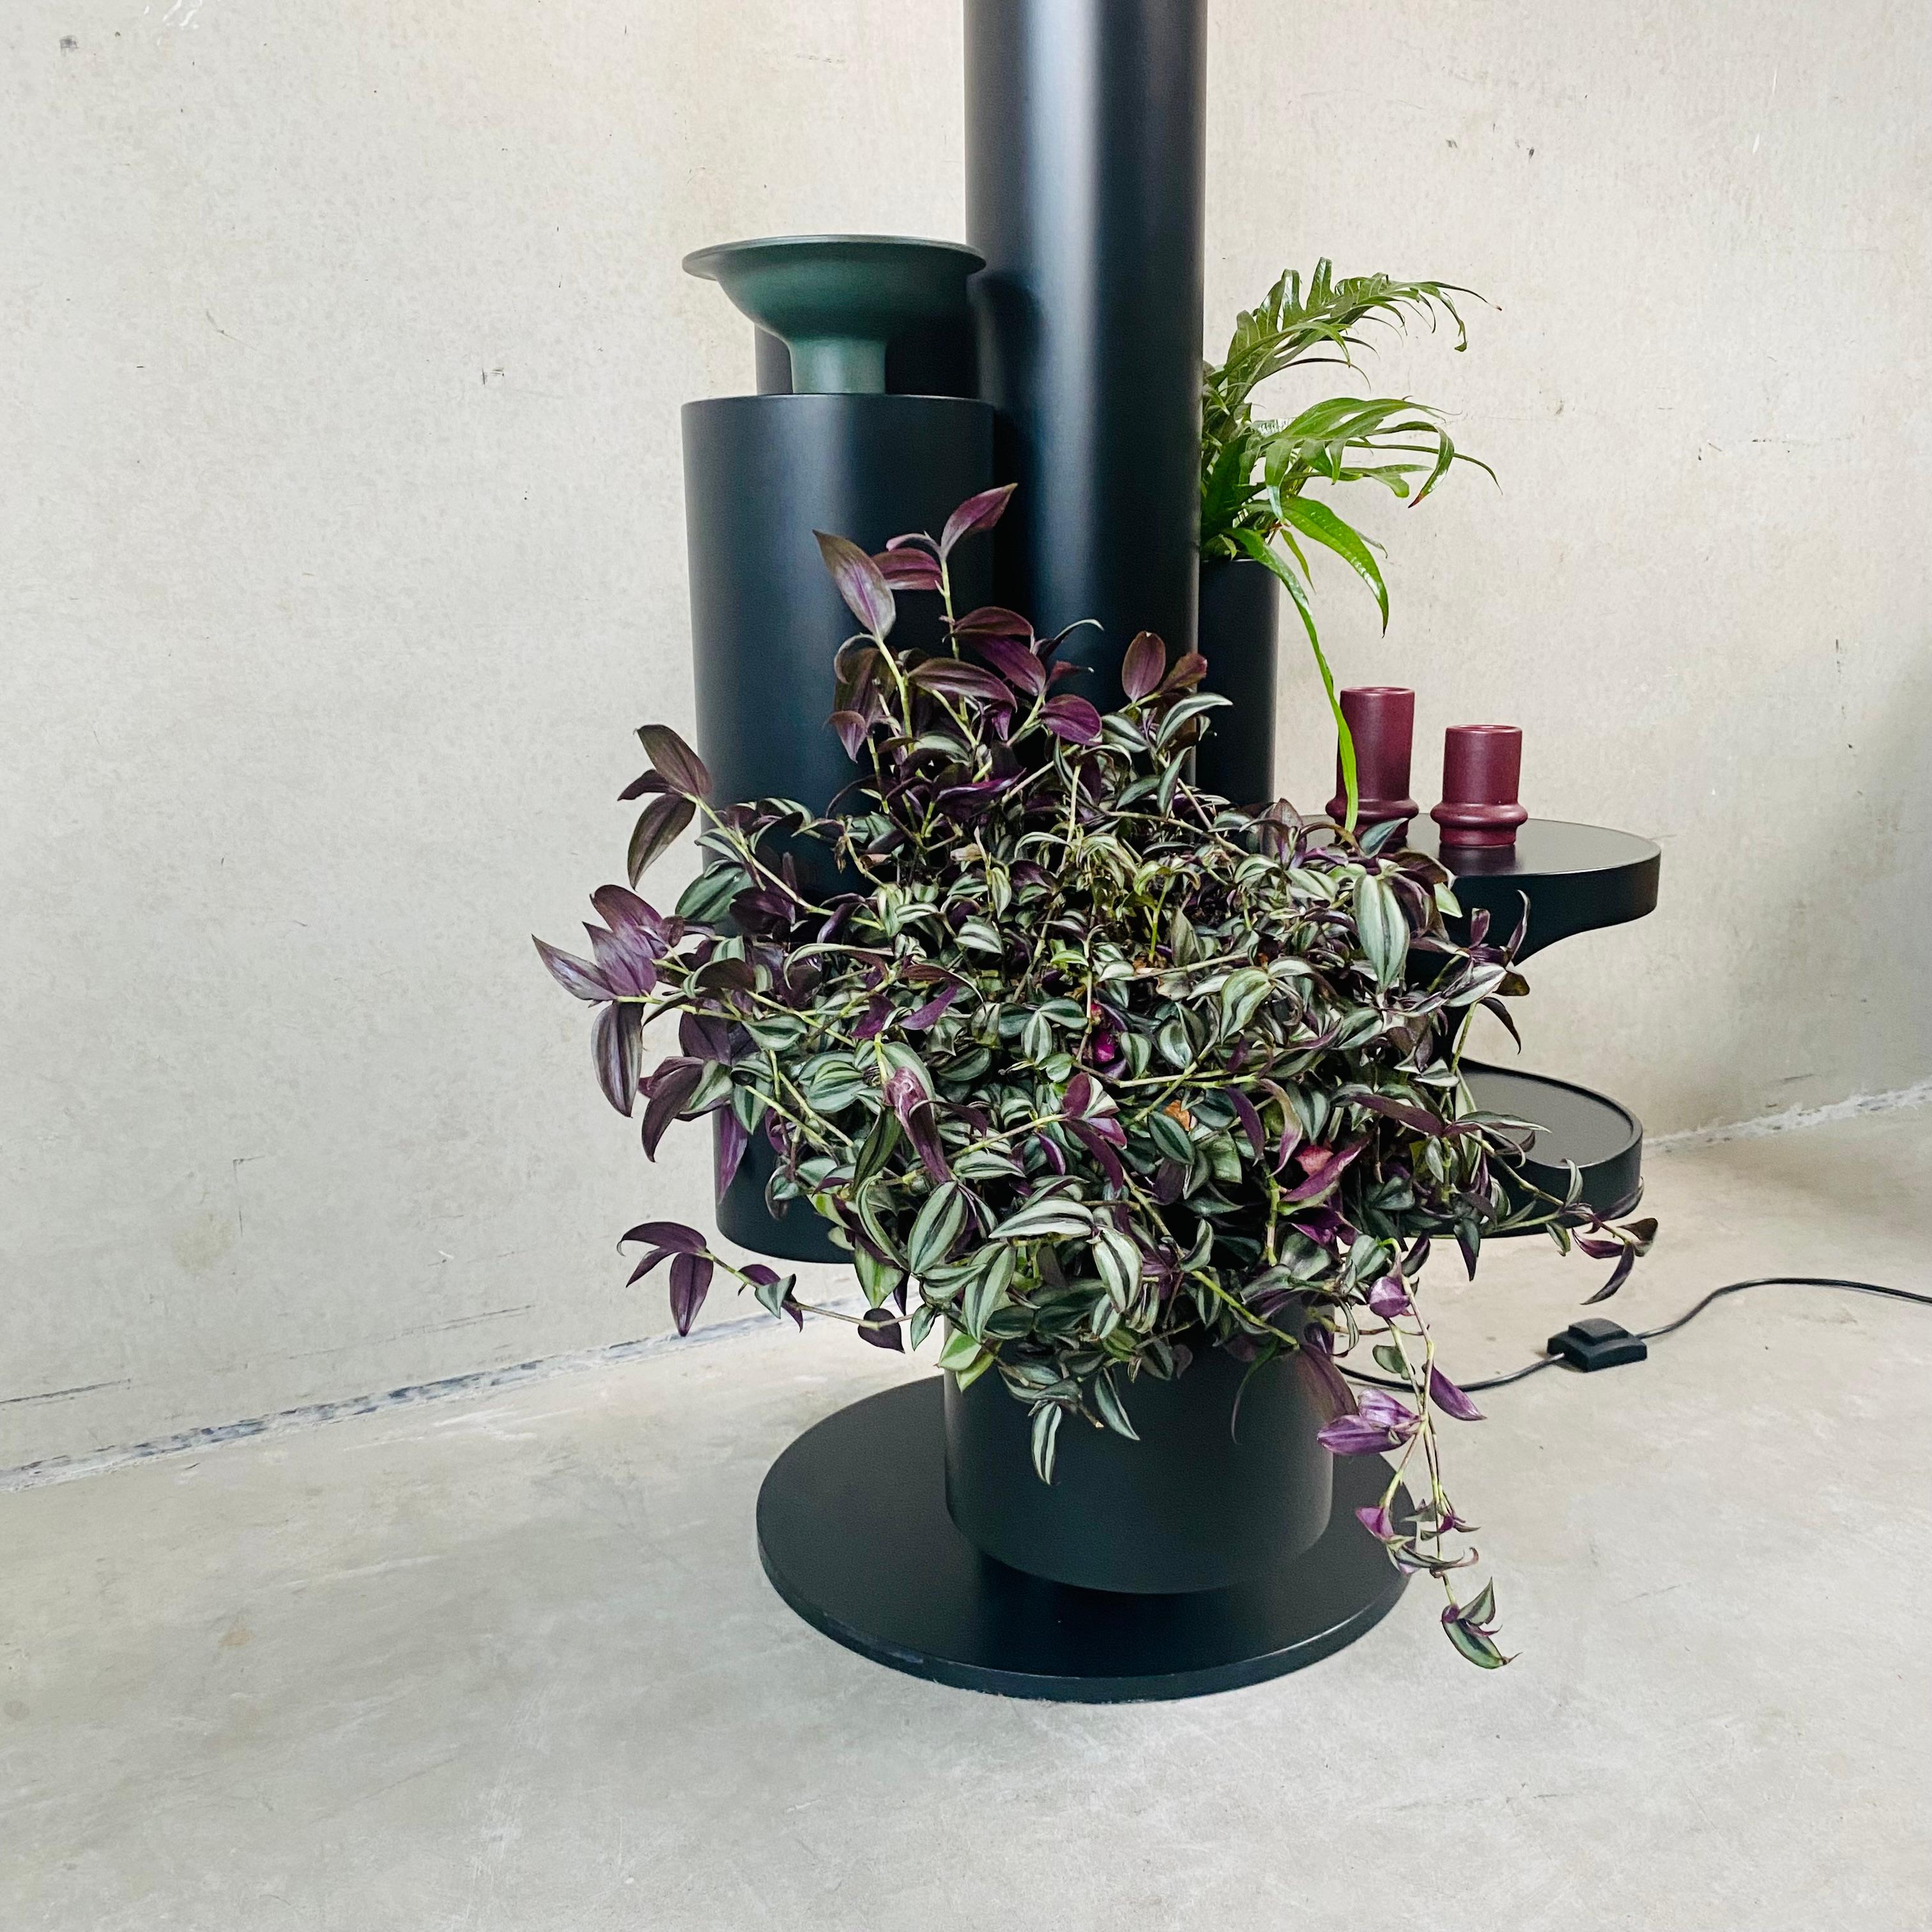 Floor lamp and plant stand 